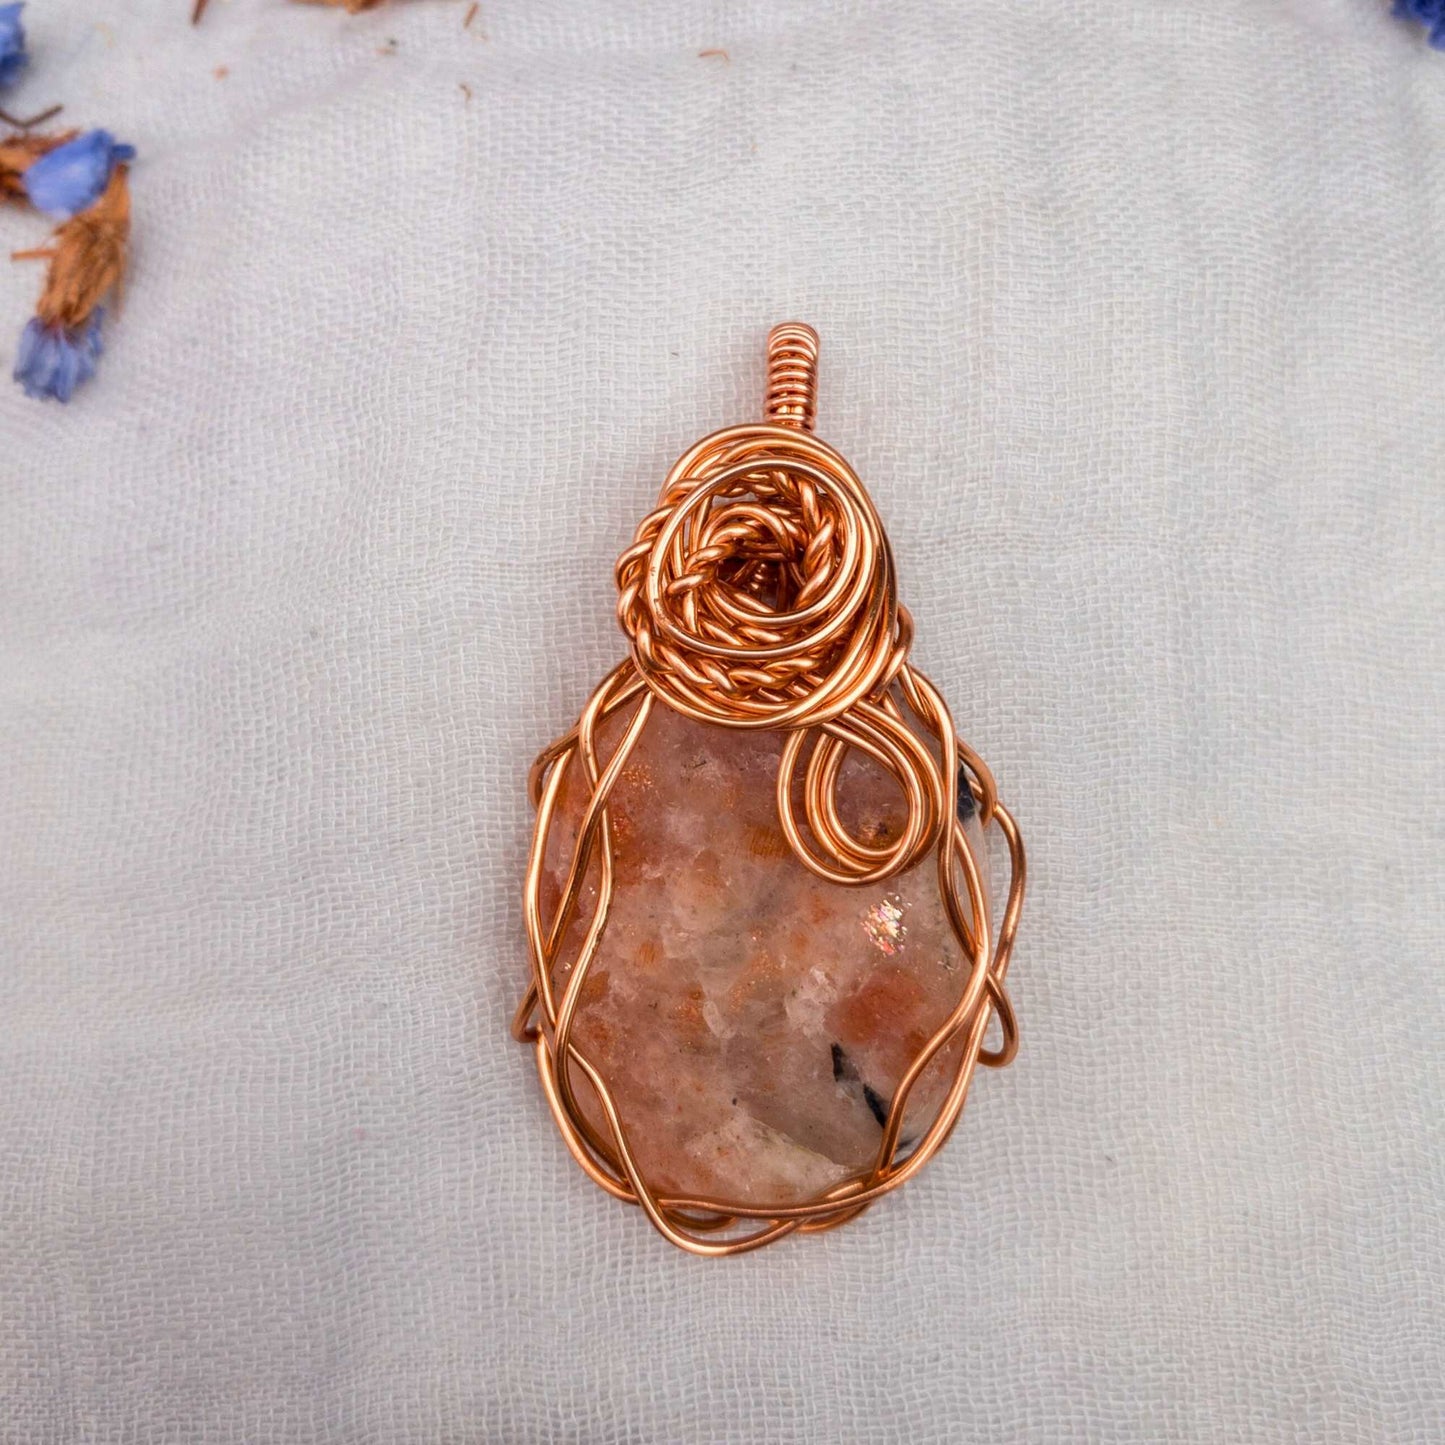 large sunstone wire wrapped in copper wire with rose wrap decal